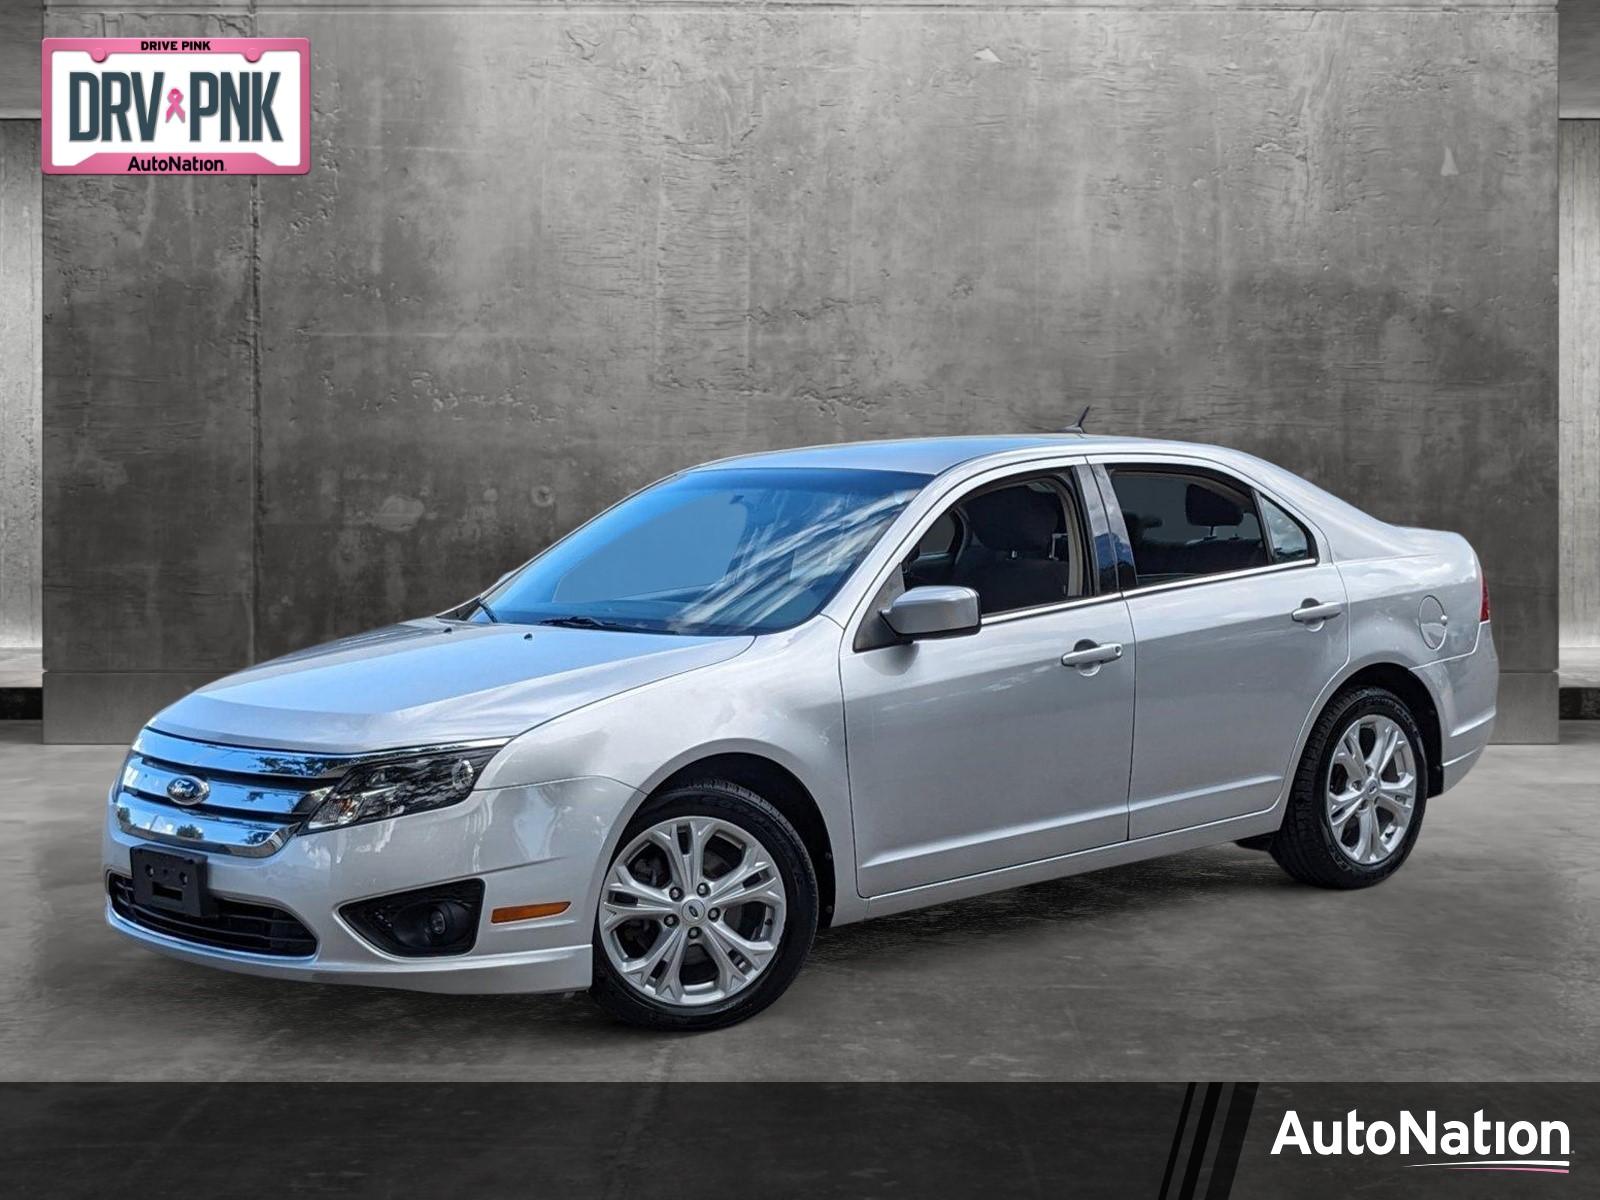 2012 Ford Fusion Vehicle Photo in Tampa, FL 33614